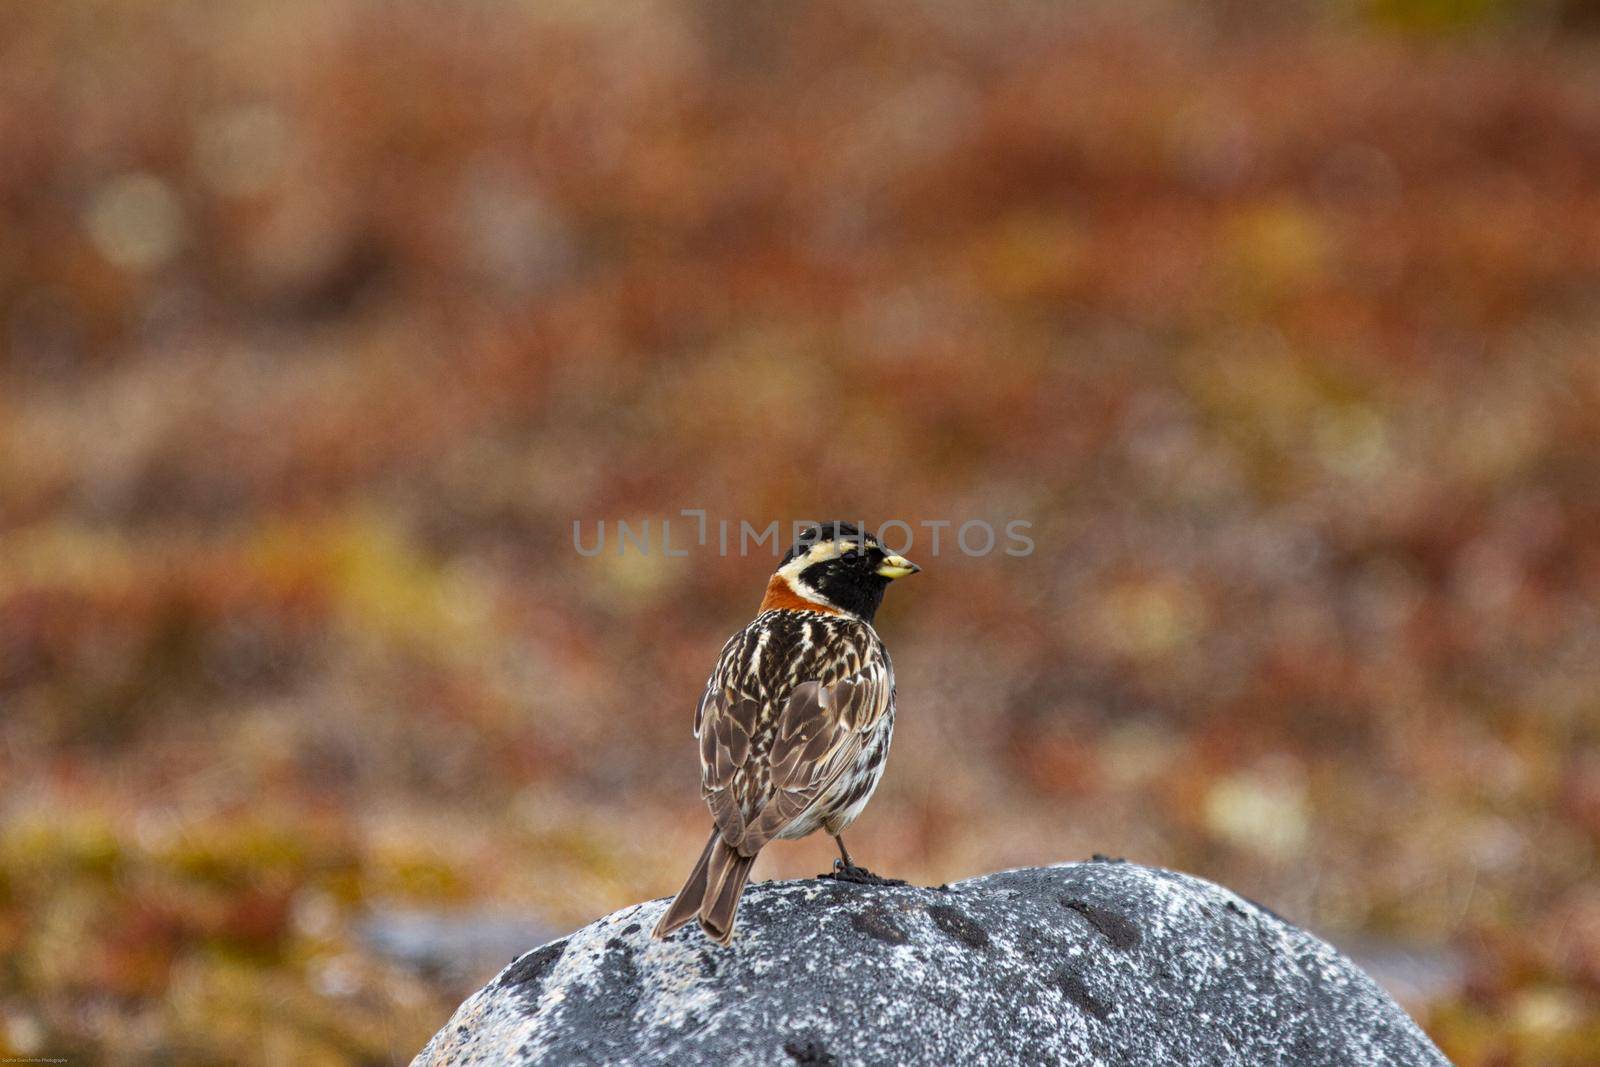 Lapland longspur bird standing on a rock with red tundra in the background by Granchinho